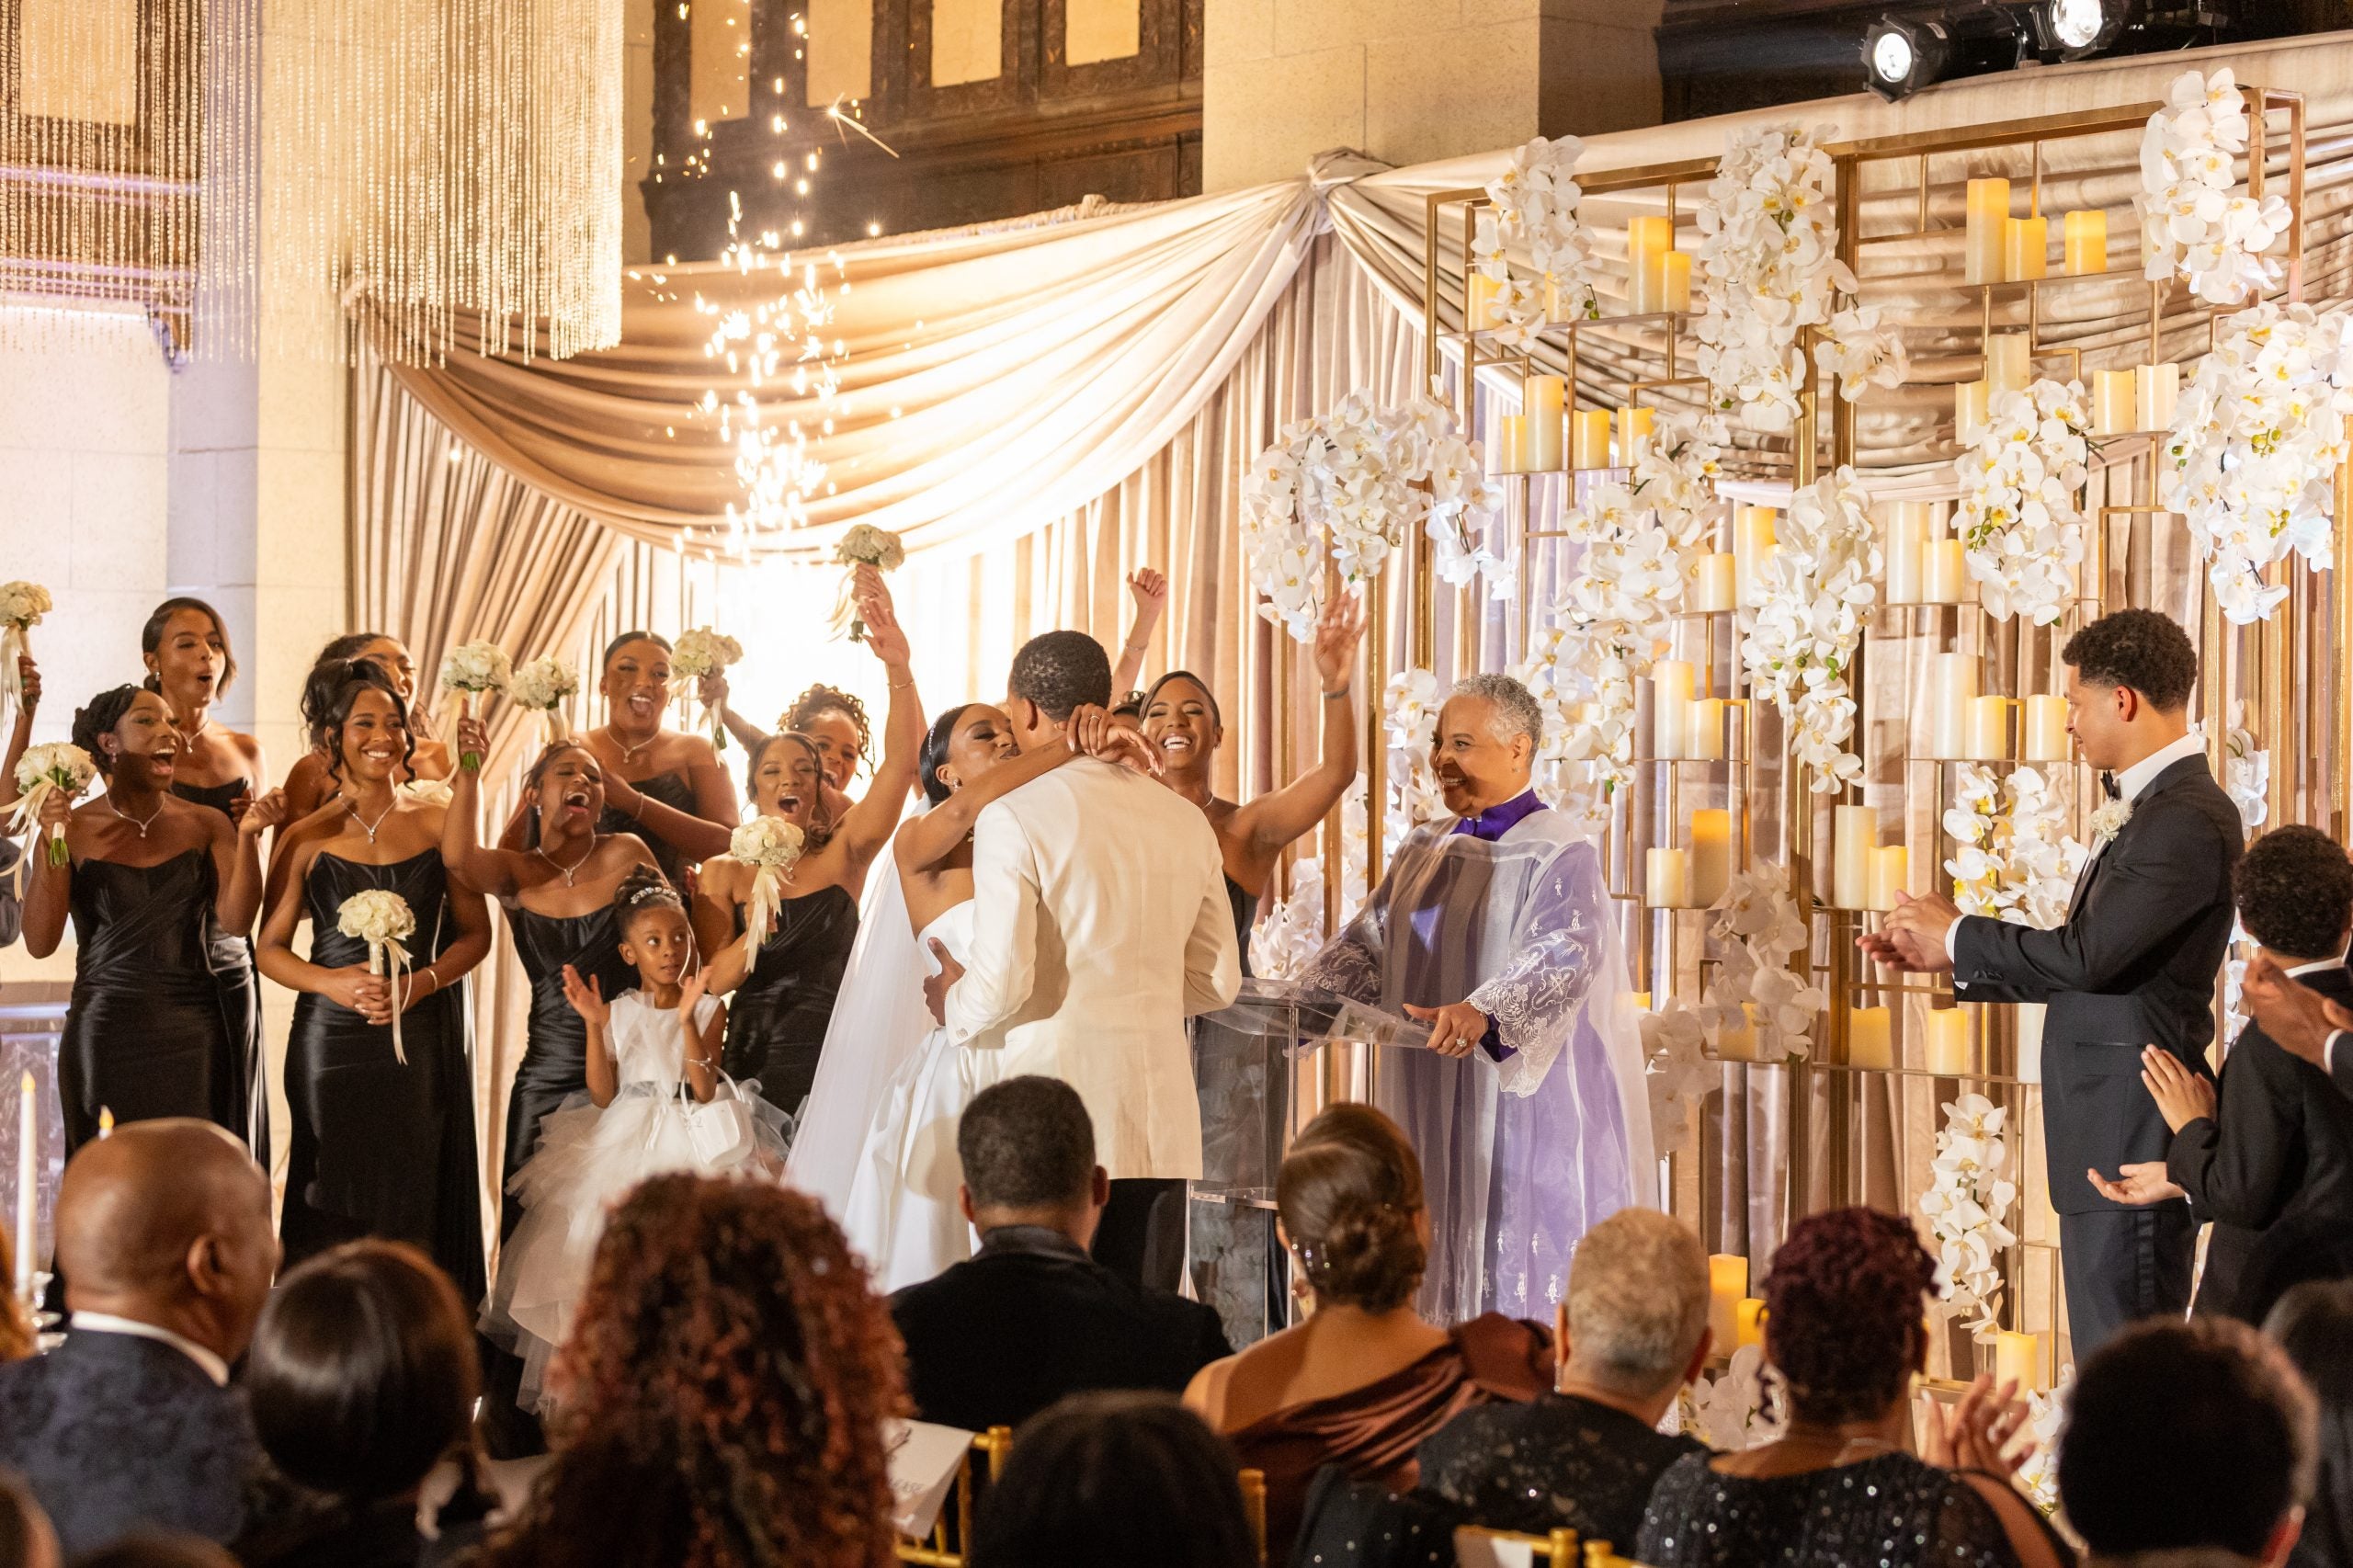 Bridal Bliss: Vanessa Bell Calloway's Daughter Ally Married Longtime Love Zach In A Star-Studded, 'Old Hollywood' Inspired Celebration